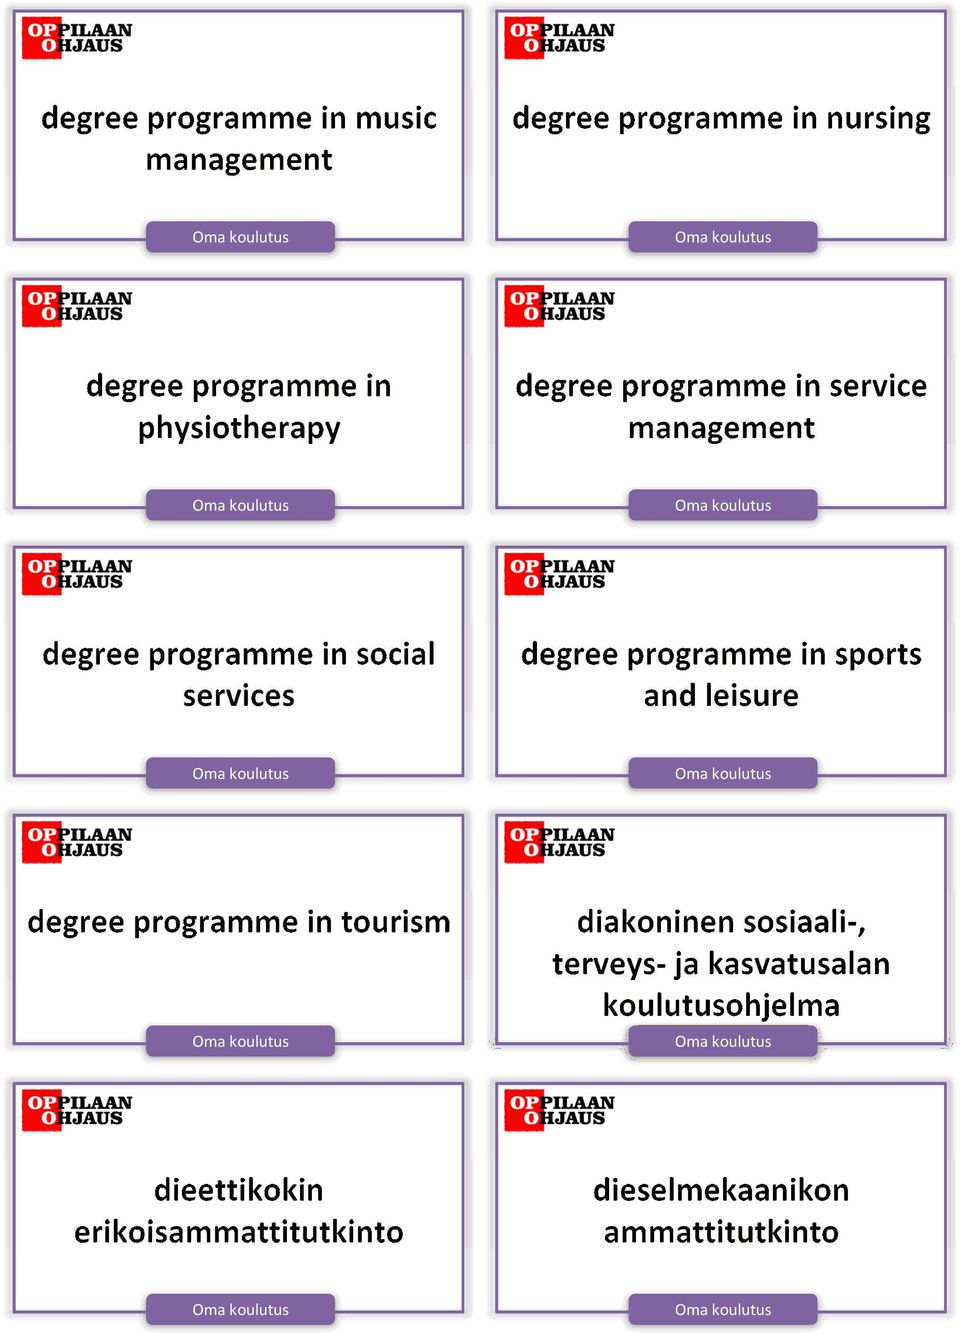 social services degree programme in sports and leisure degree programme in